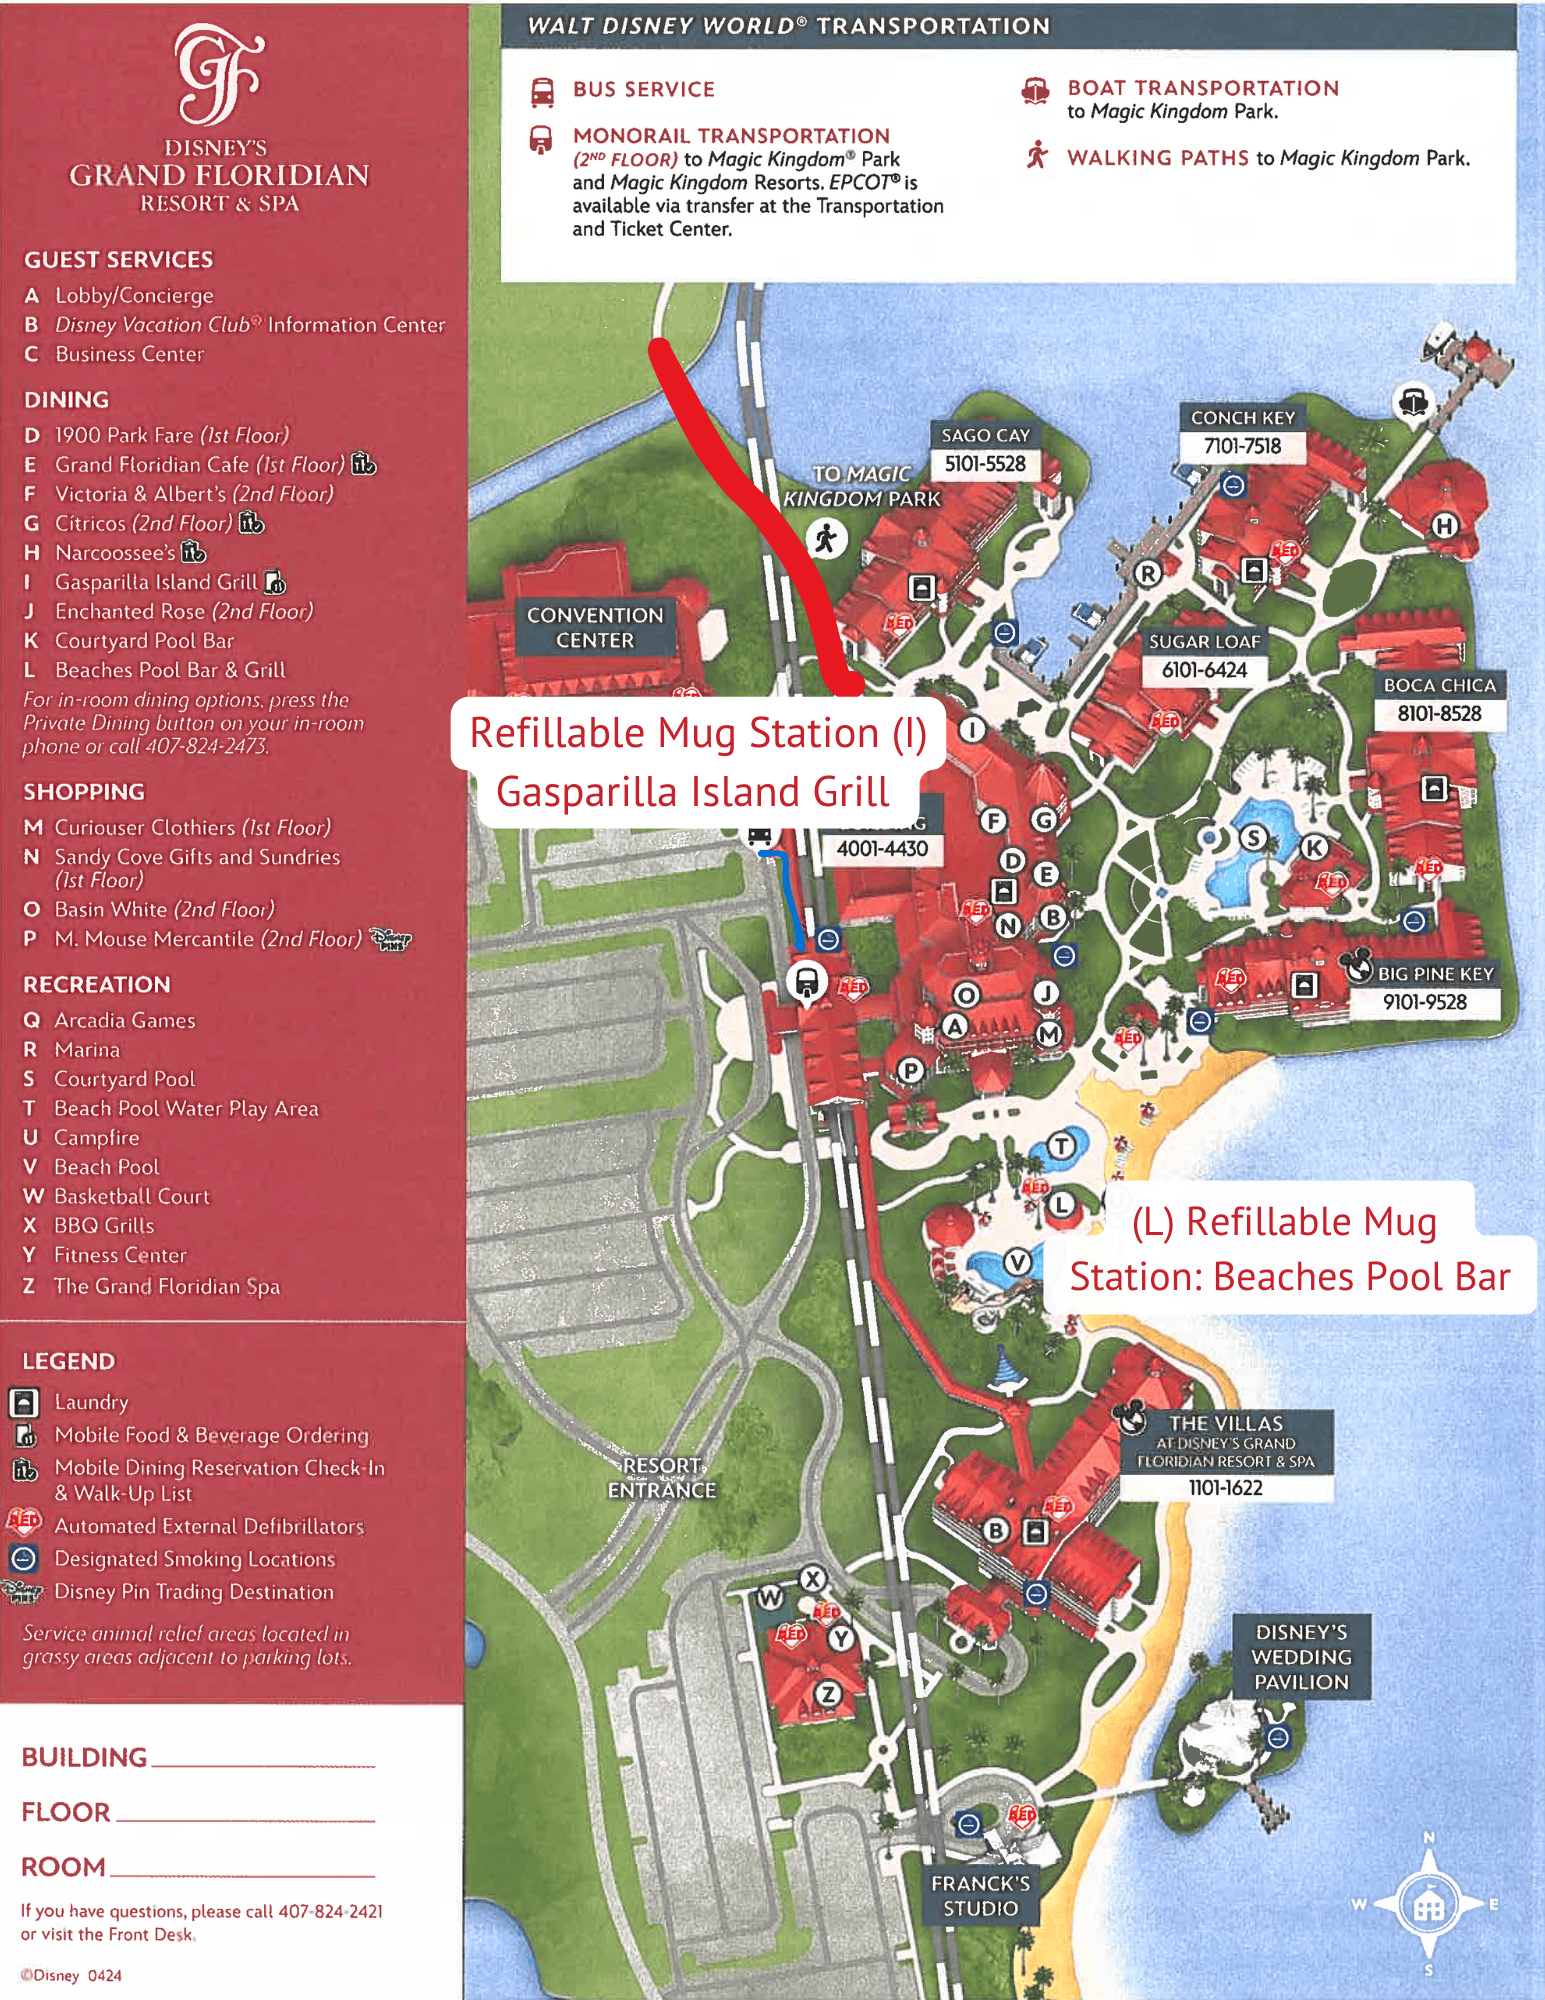 a map of the Grand Floridian that shows the refillable mug locations